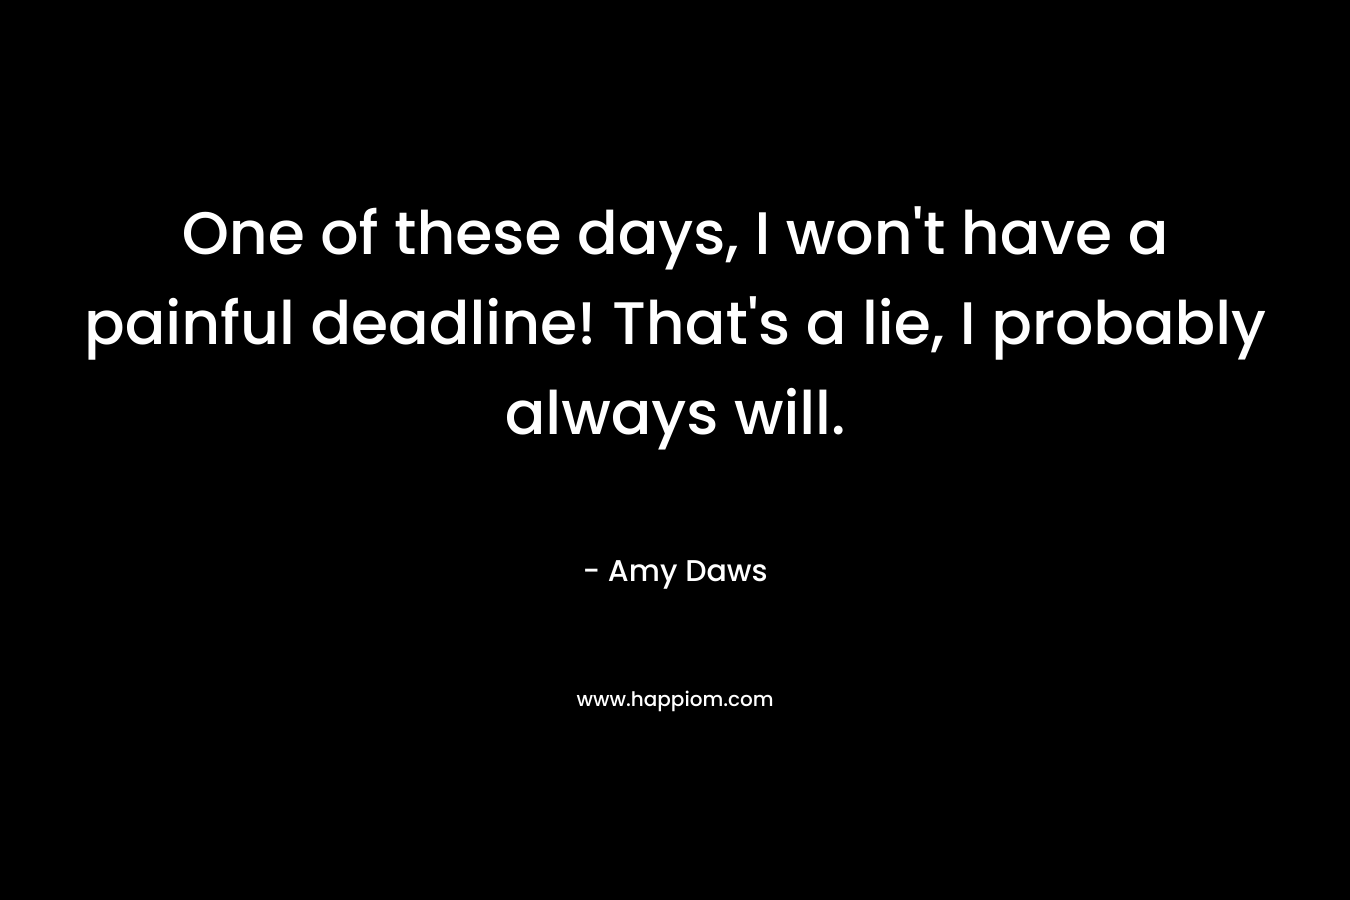 One of these days, I won’t have a painful deadline! That’s a lie, I probably always will. – Amy Daws